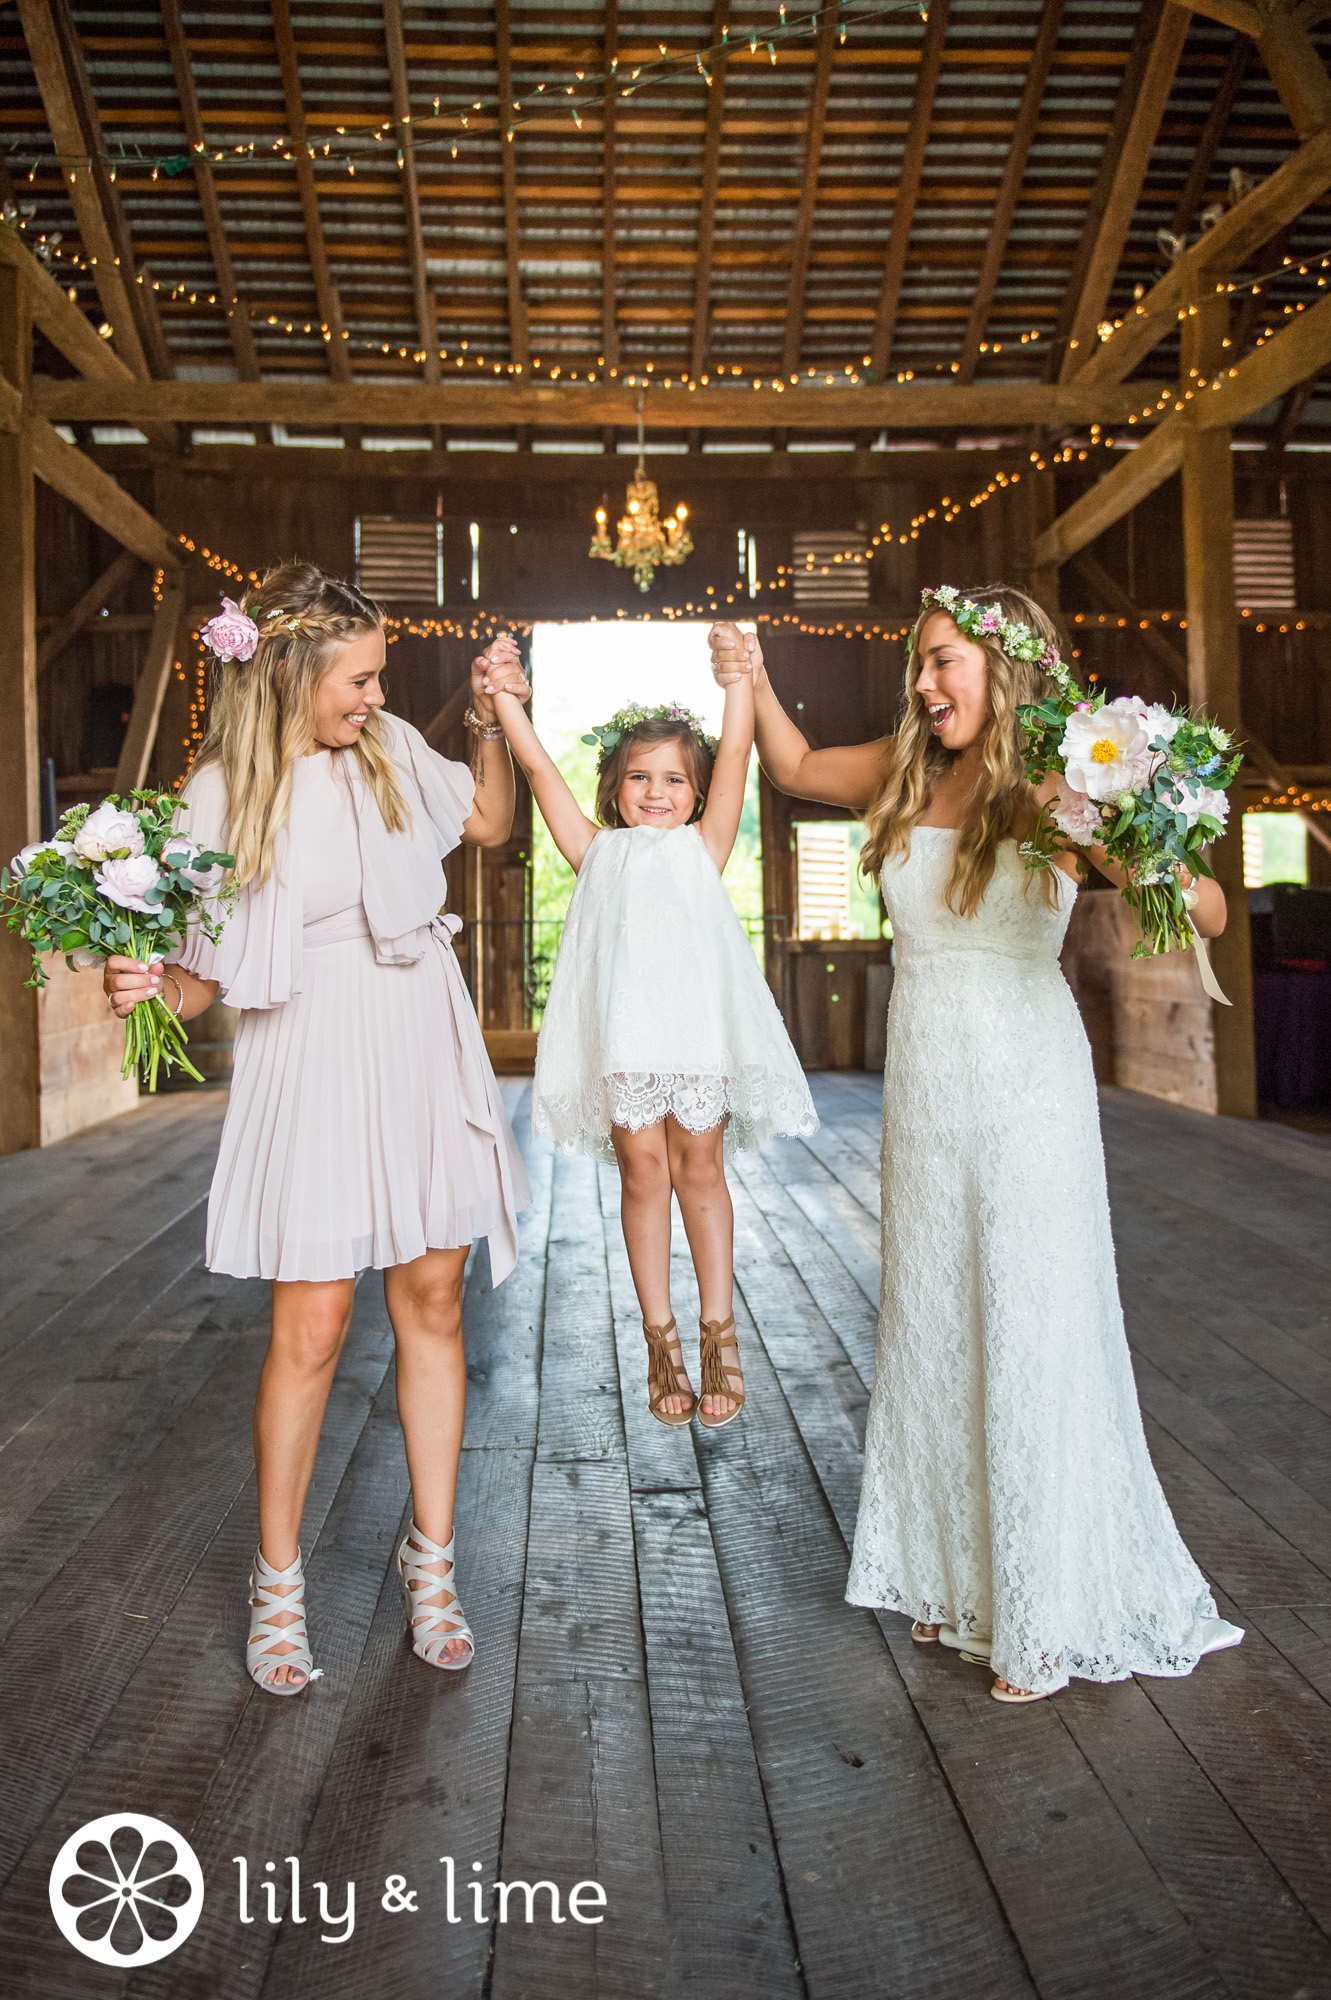 matching flower girl and bridesmaids